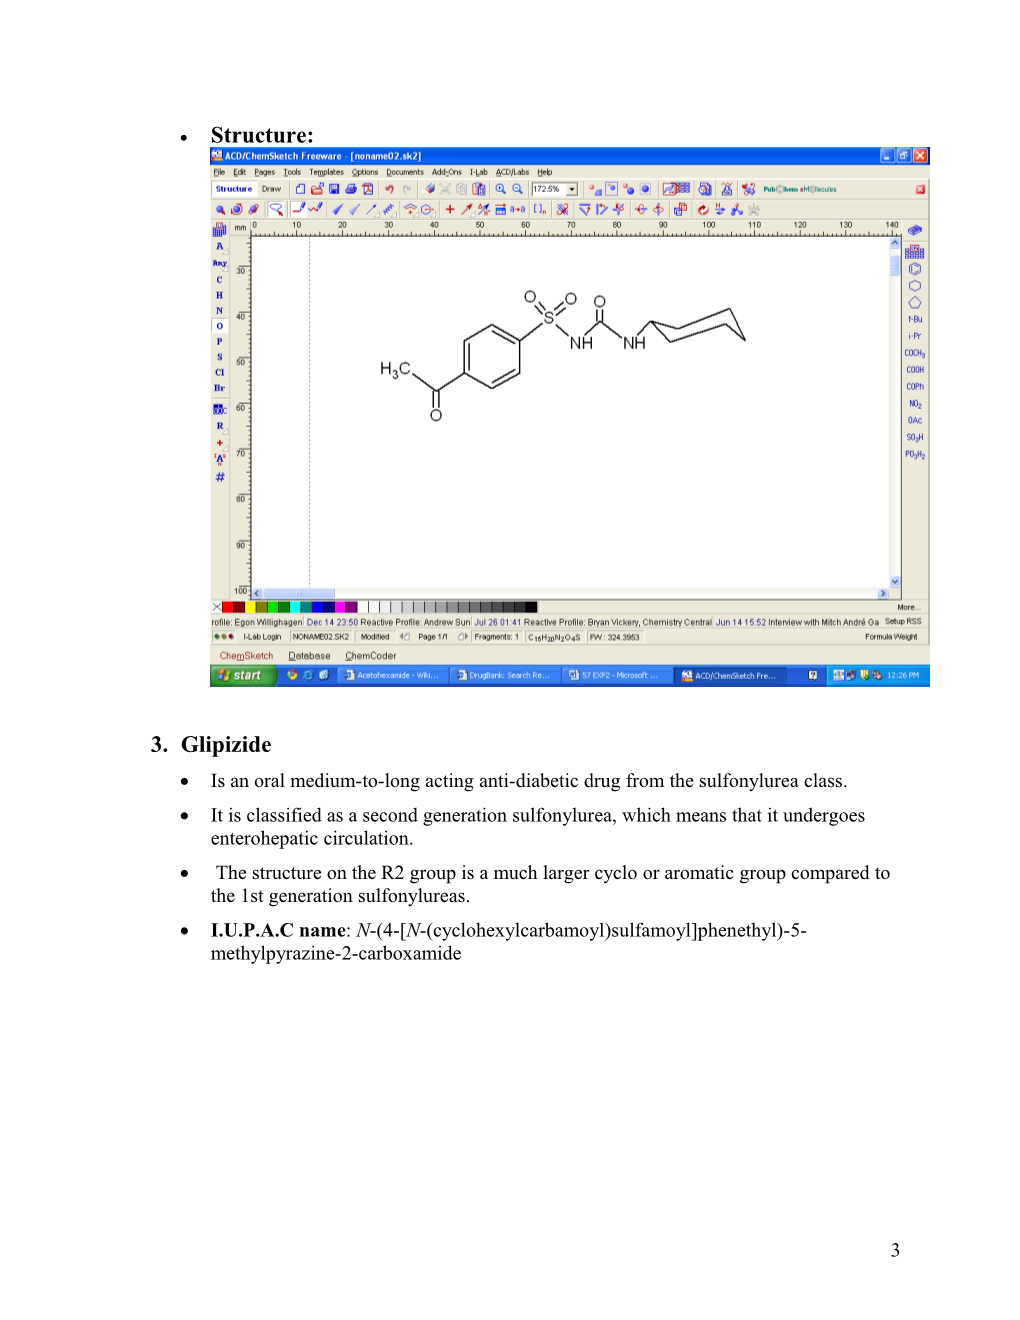 AIM: to Study and Draw the Structure of Antidiabetic Agents Or Antiglycemic Drugs